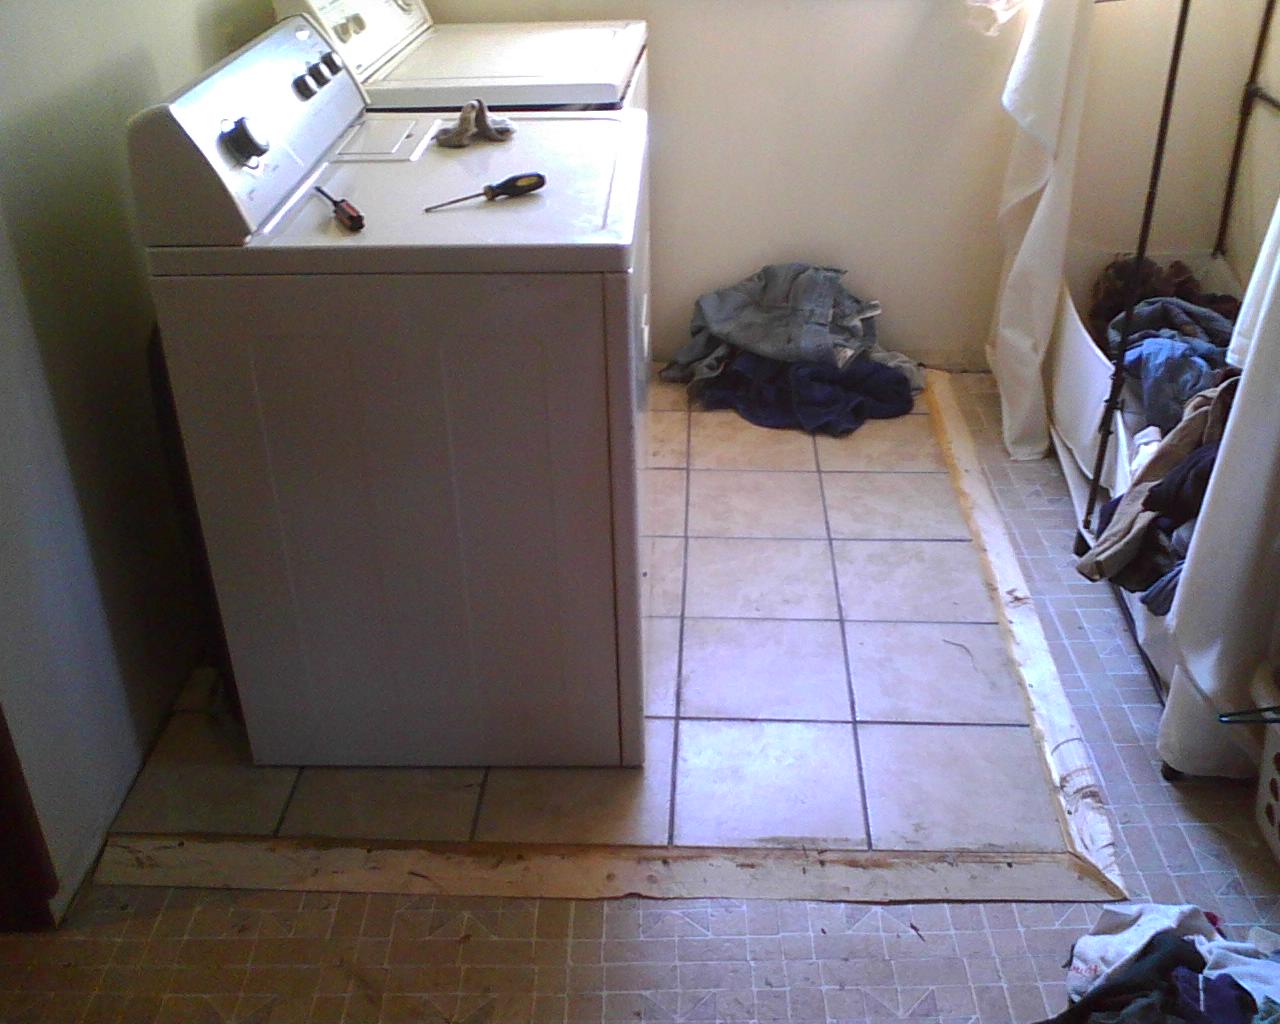 the interior of a dirty bathroom with a washing machine in it